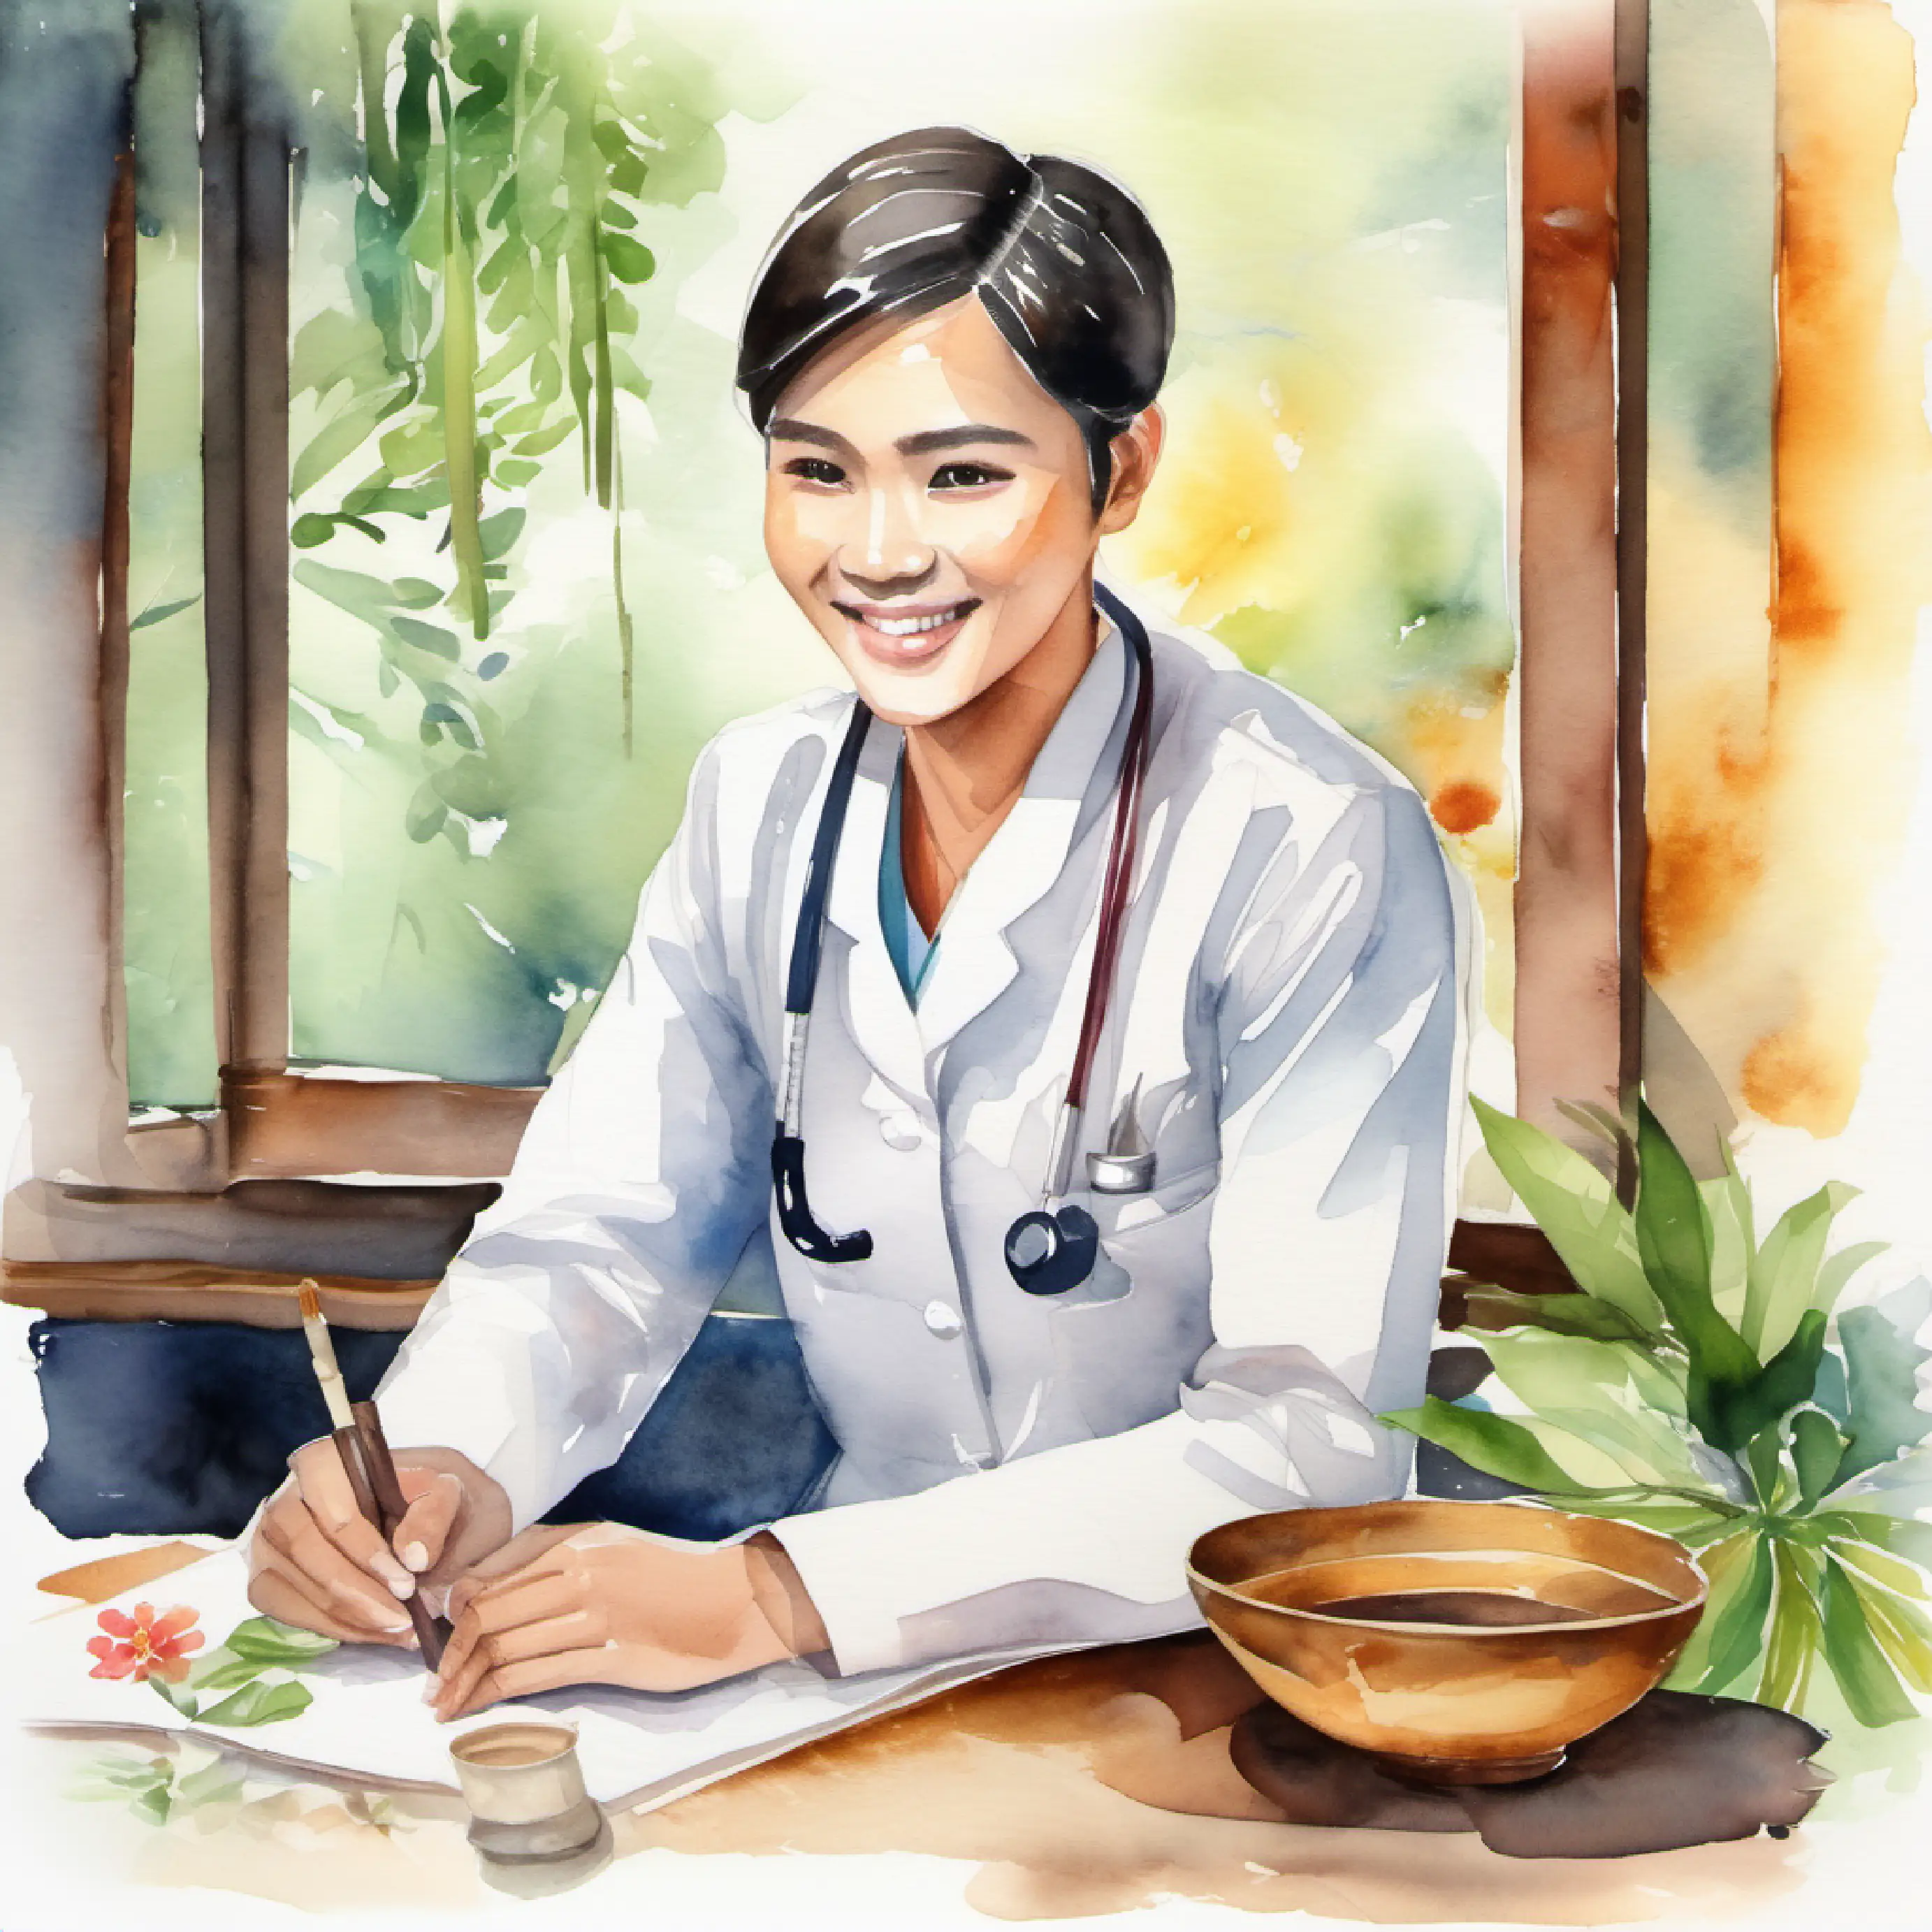 Young doctor with healing hands, kind eyes, warm smile learning traditional Thai medicine.